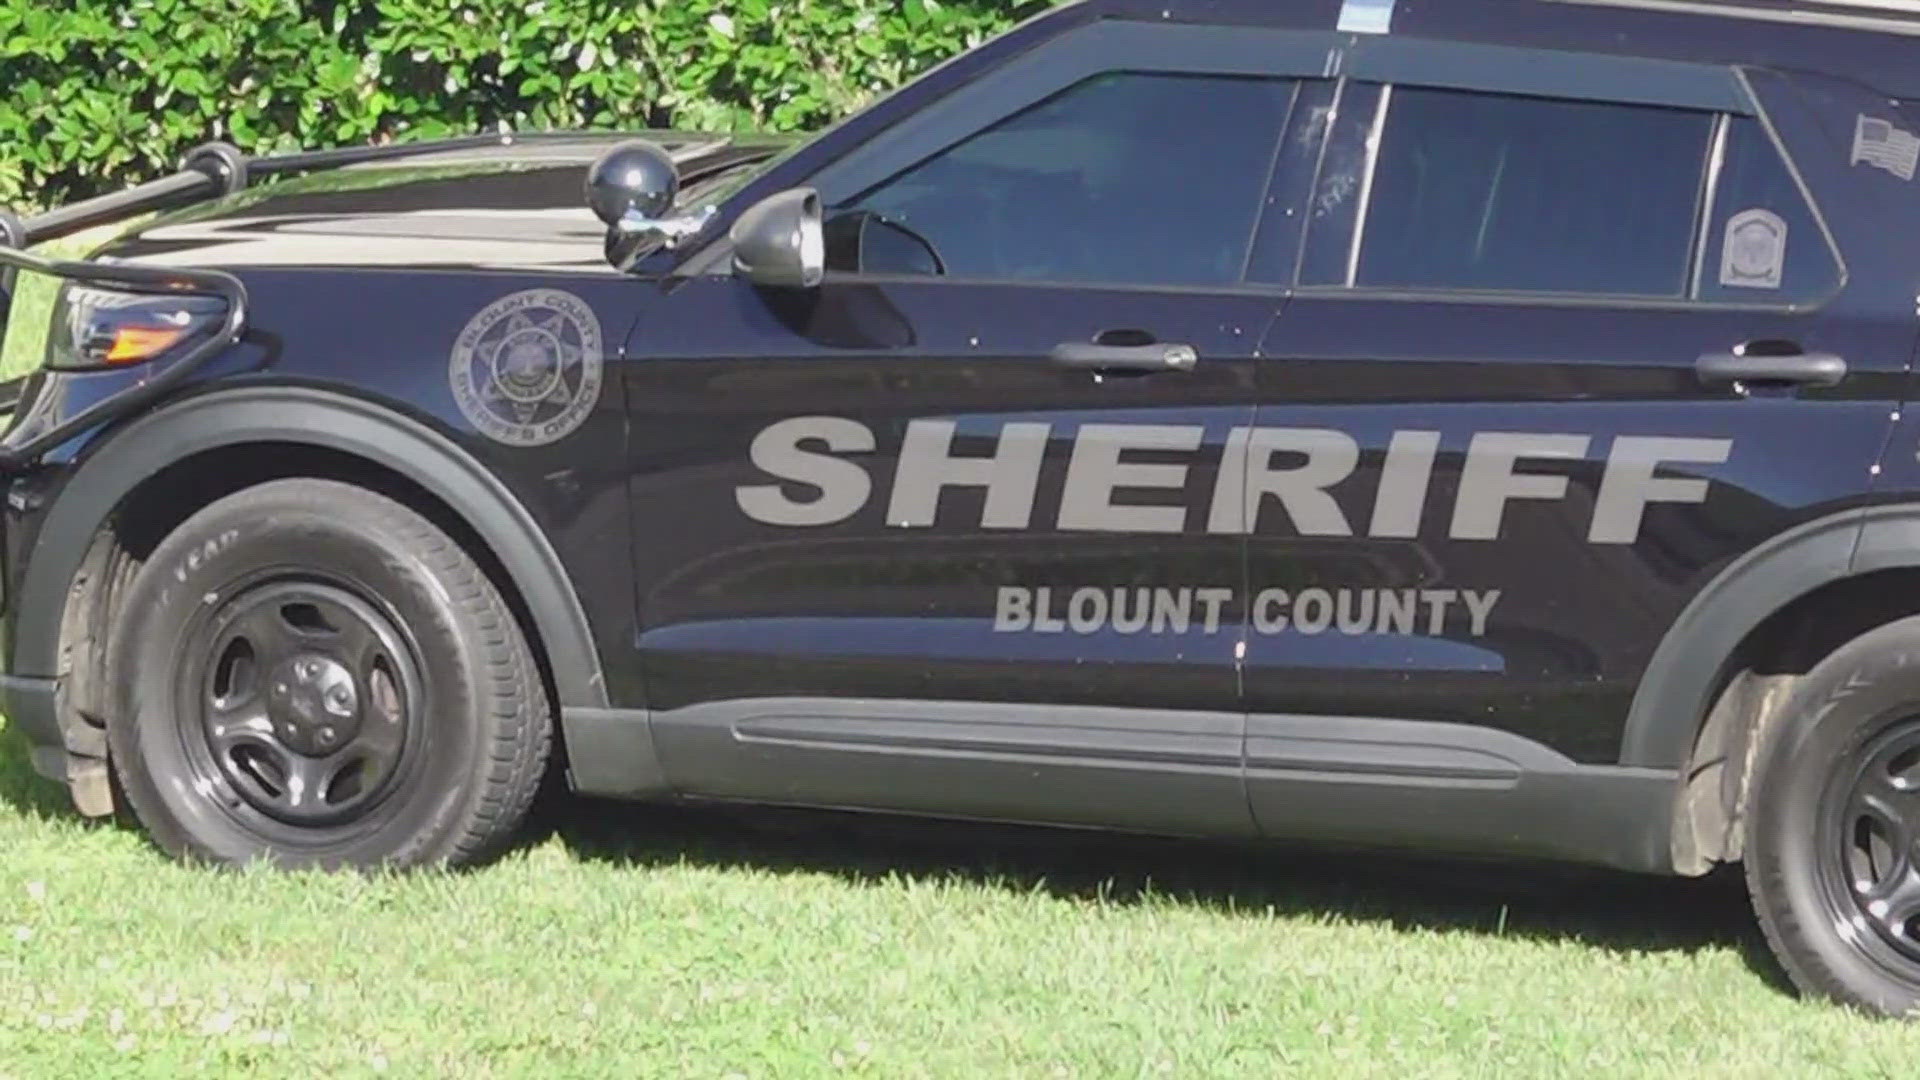 Update on 2 wounded deputies after Blount Co. shooting | wbir.com